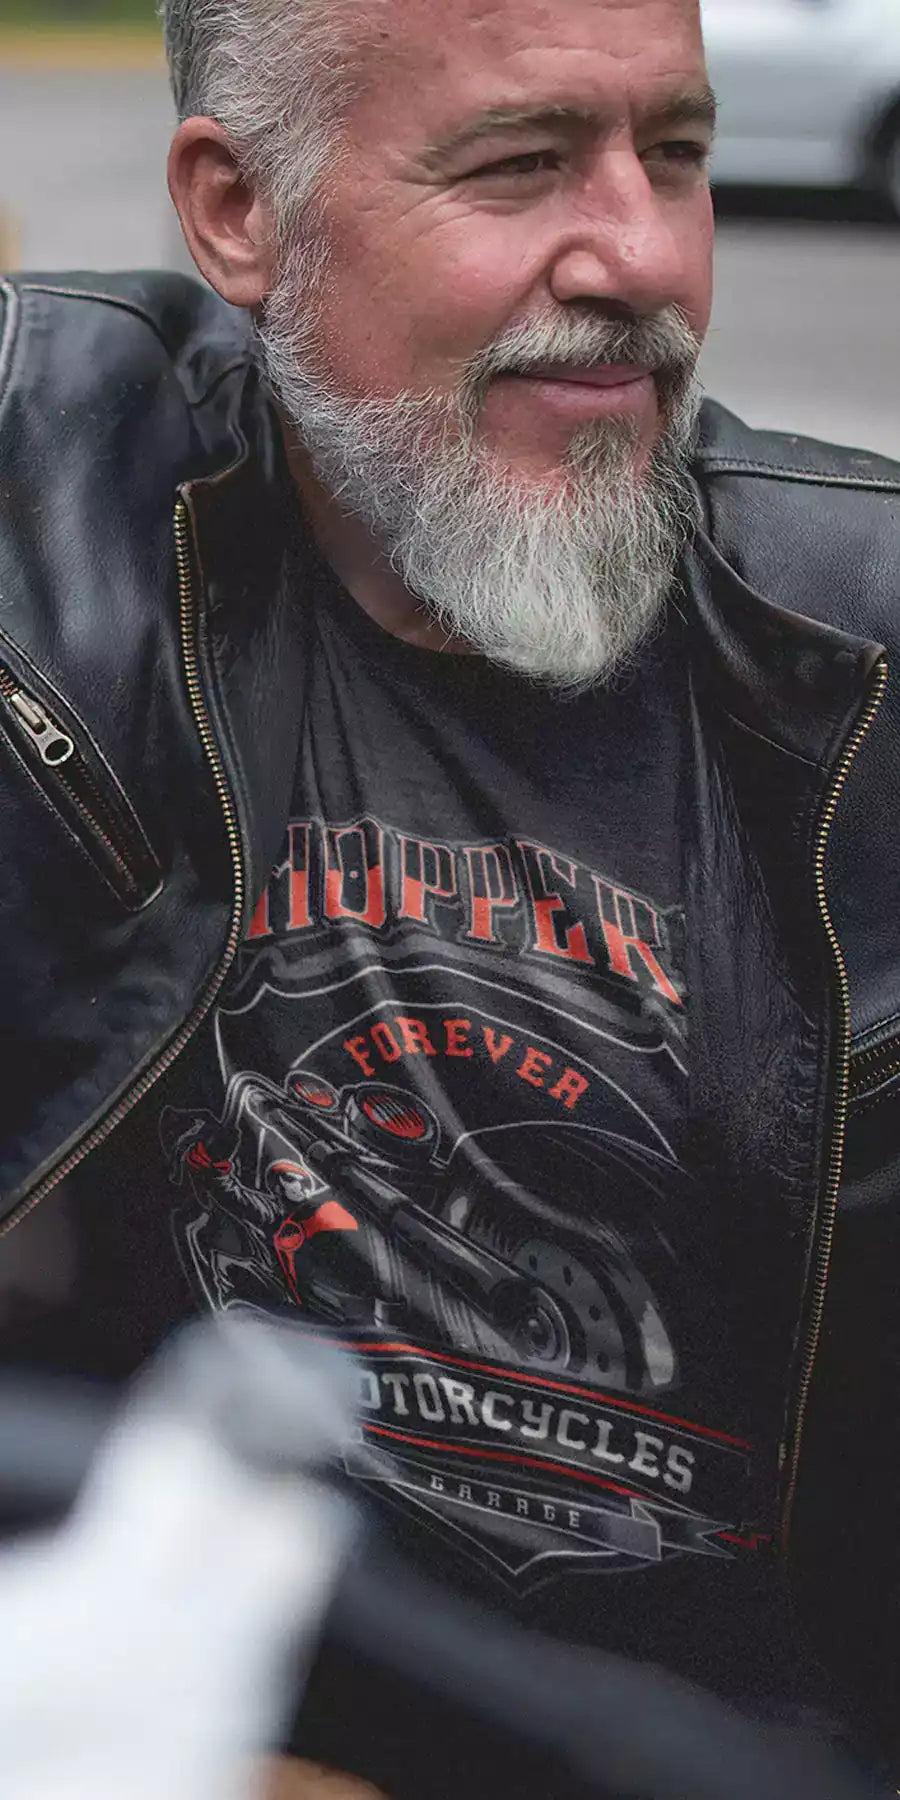 Old man sitting on a motorcycle, wearing a black leather jacket and printed black t-shirt. The t-shirt design is a motorcycle with text - Chopper forever - Mobile